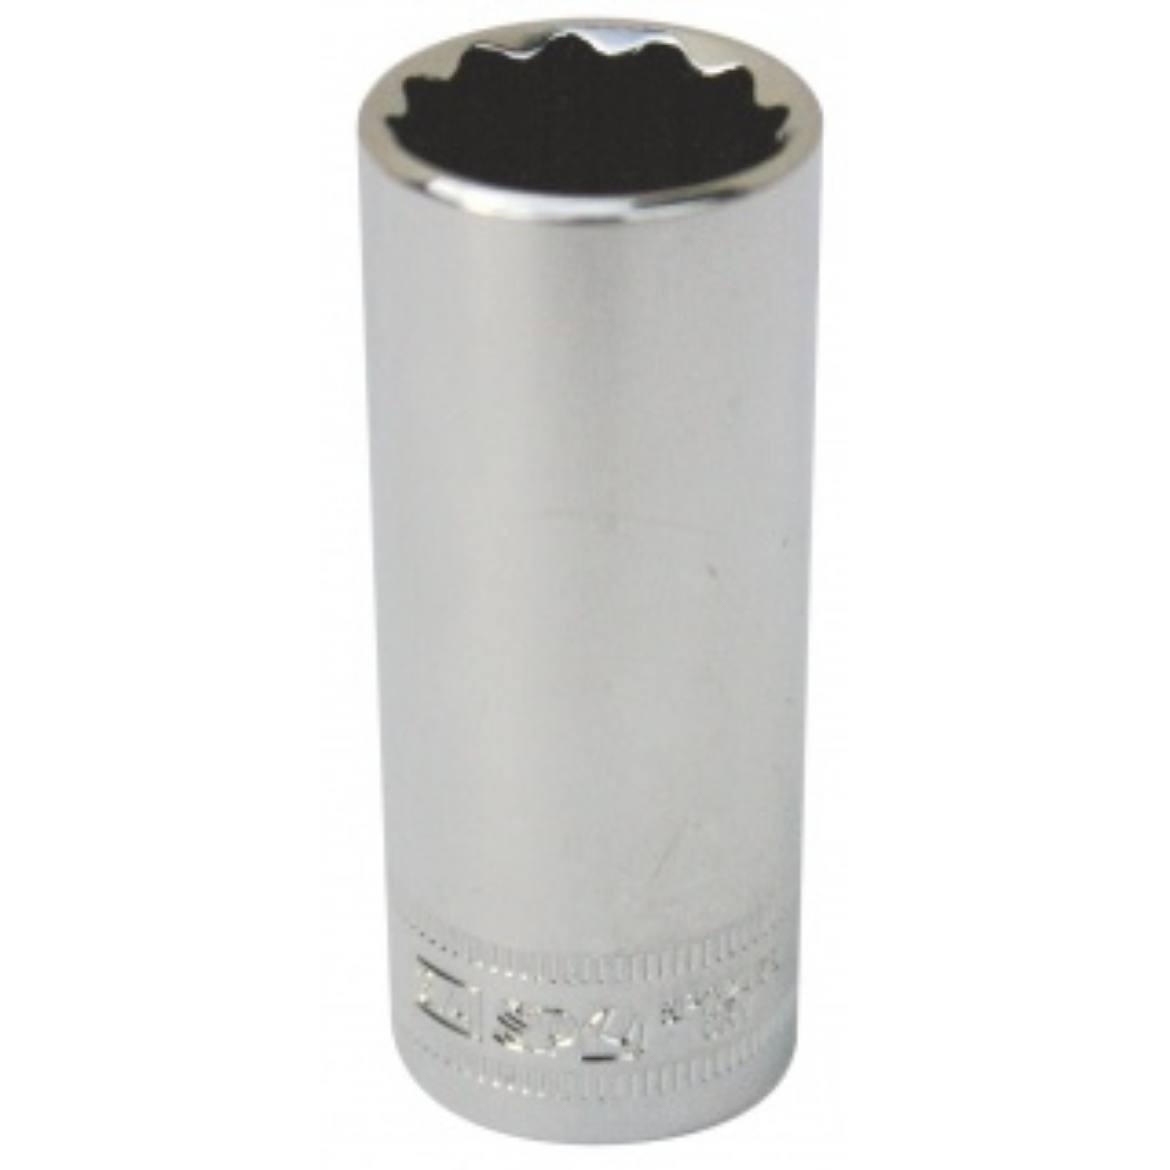 Picture of SOCKET DEEP 3/8"DR 12PT METRIC 17MM SP TOOLS